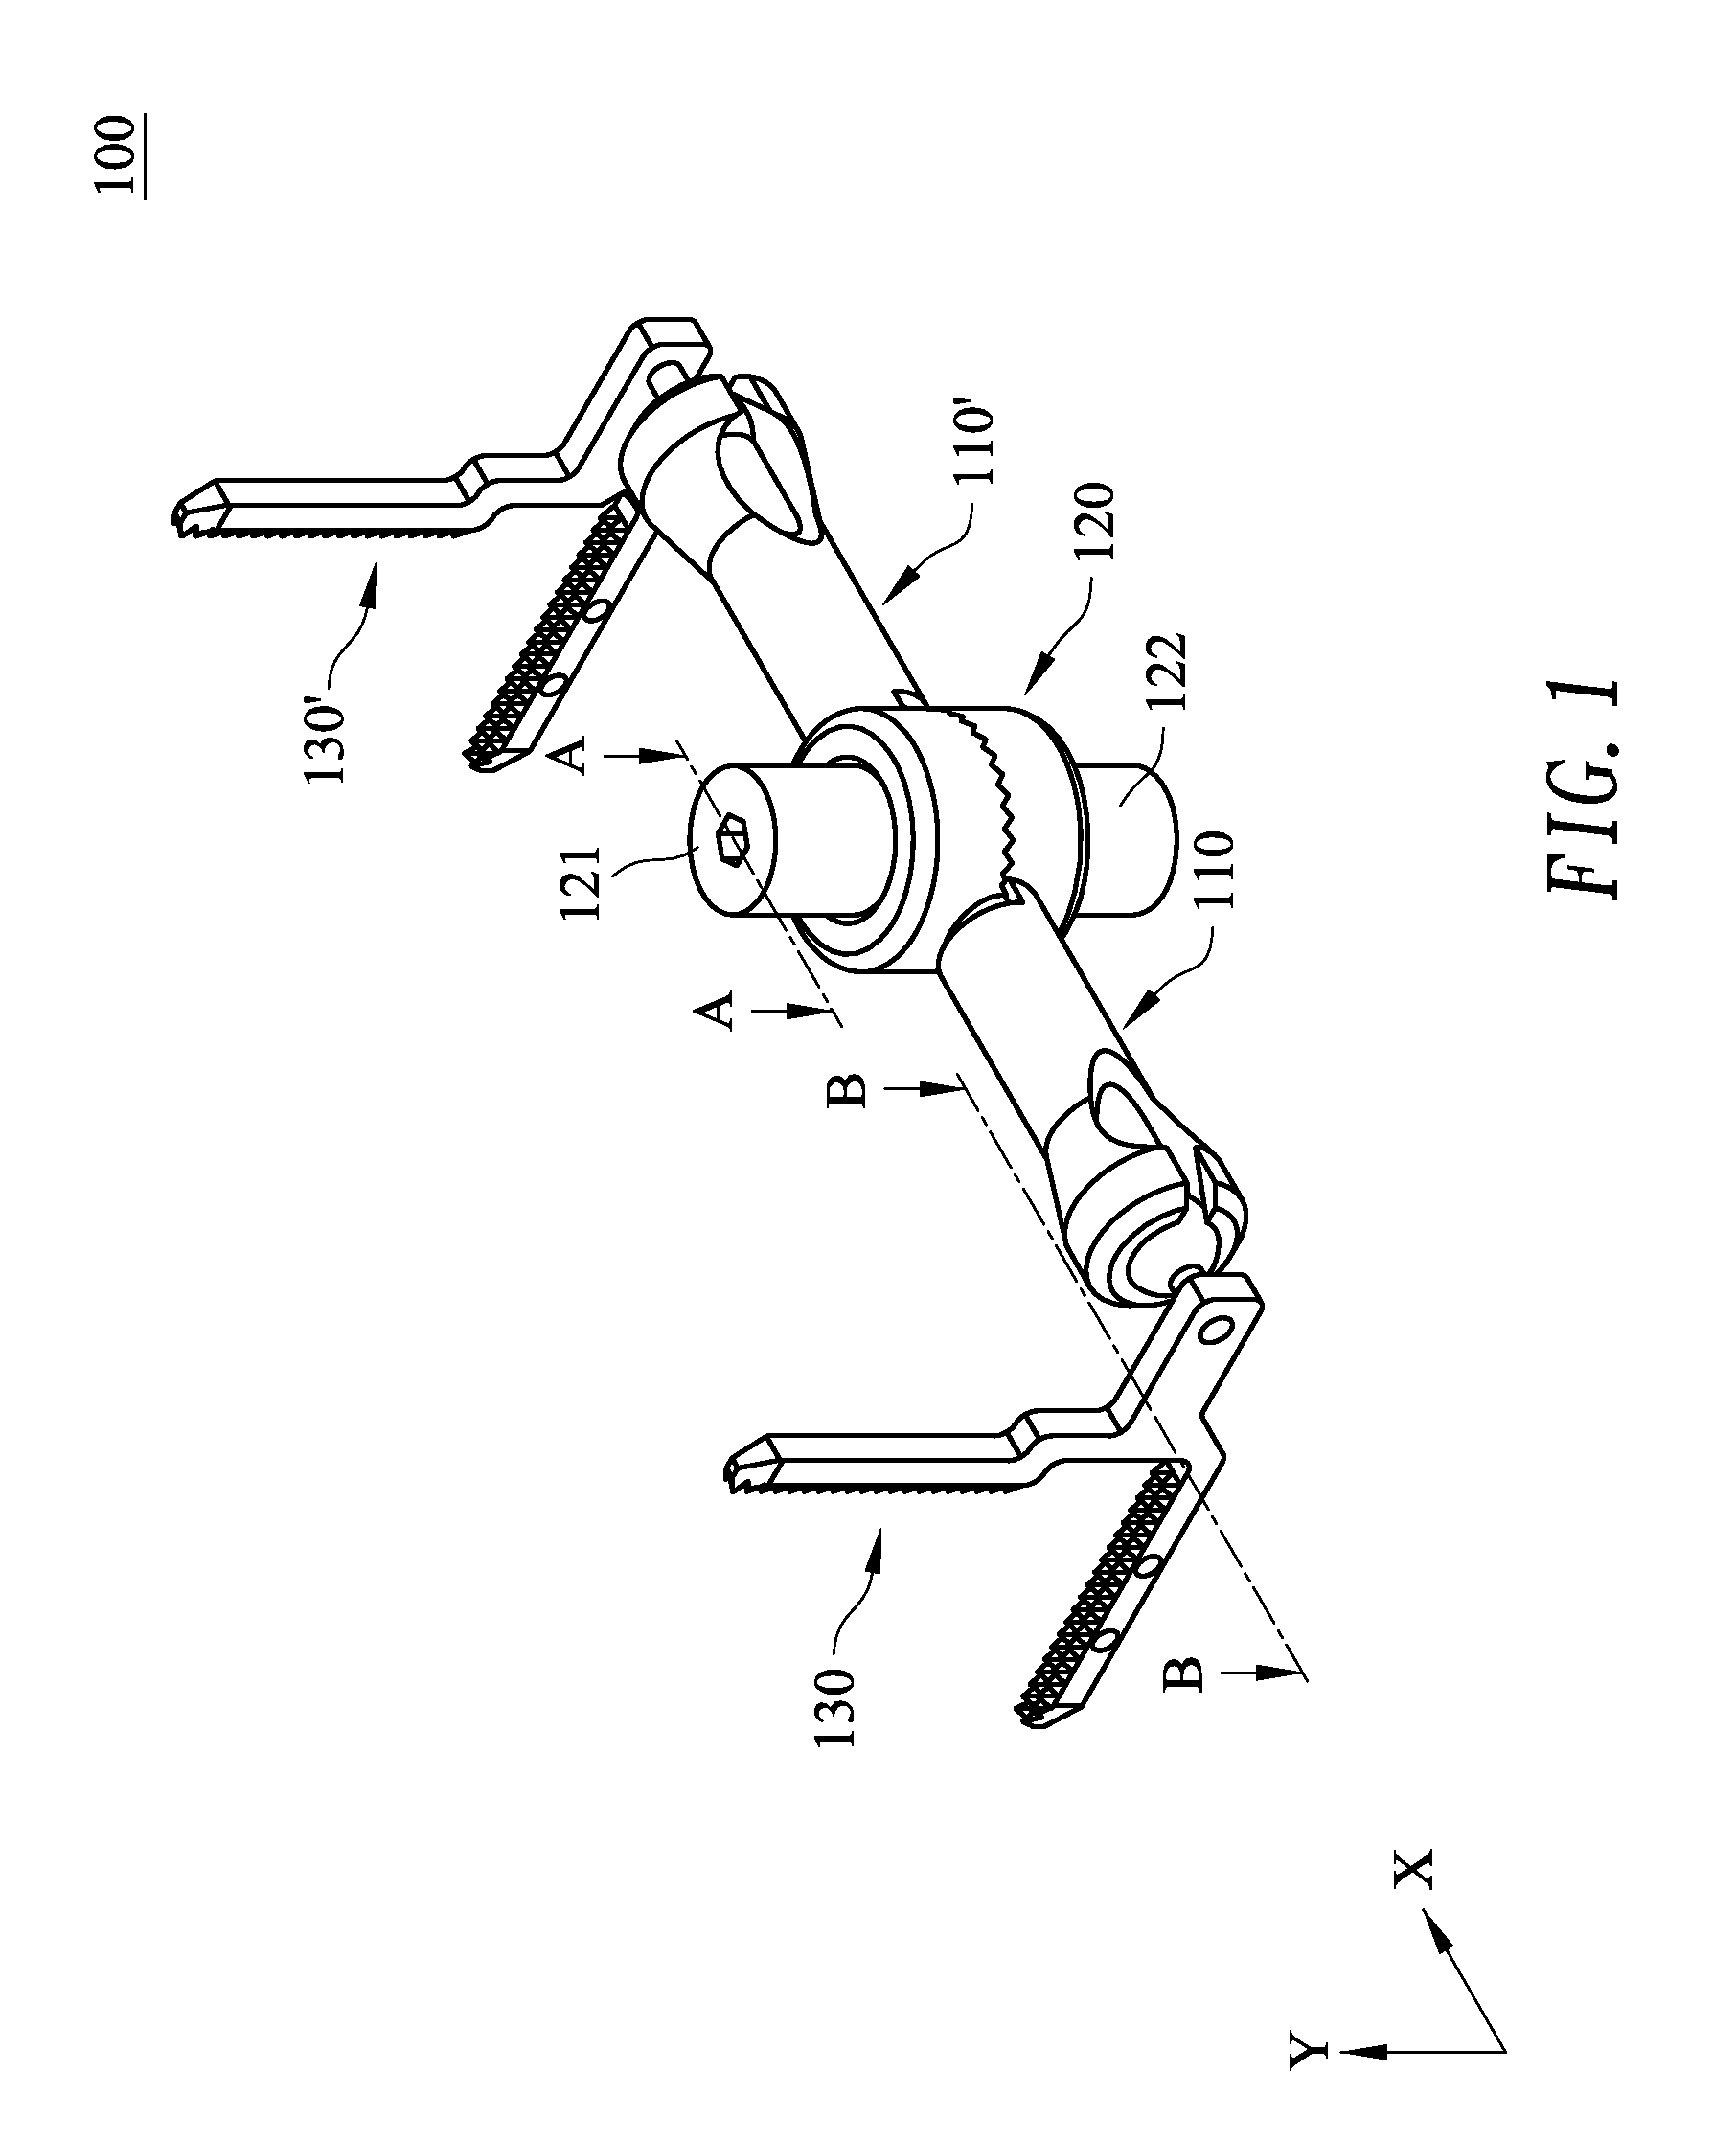 Measuring and guiding device for reconstruction surgery